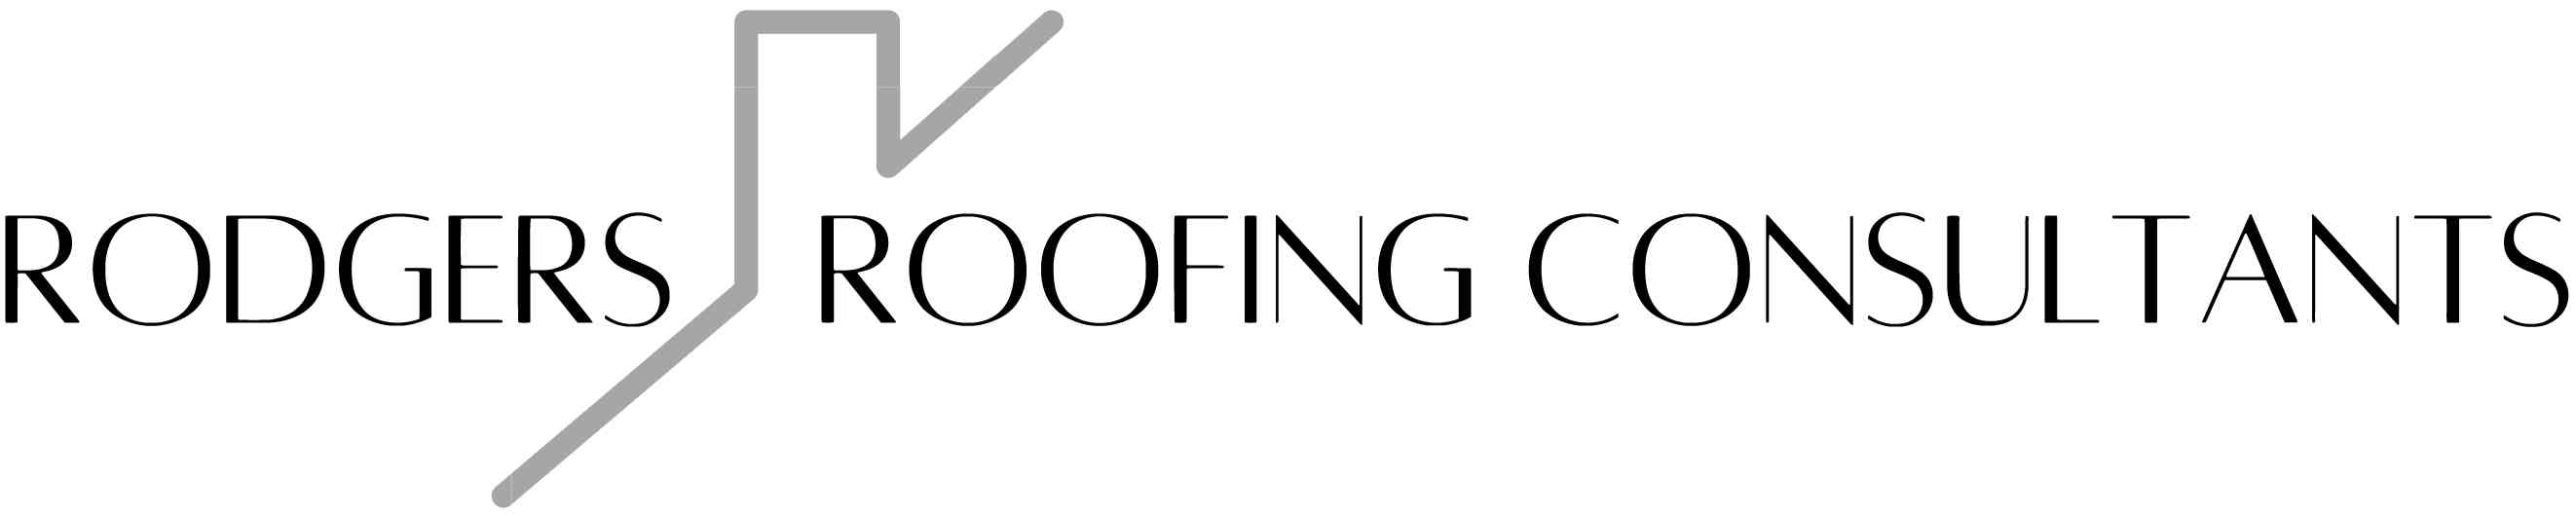 Rodger Roofing Consultant logo